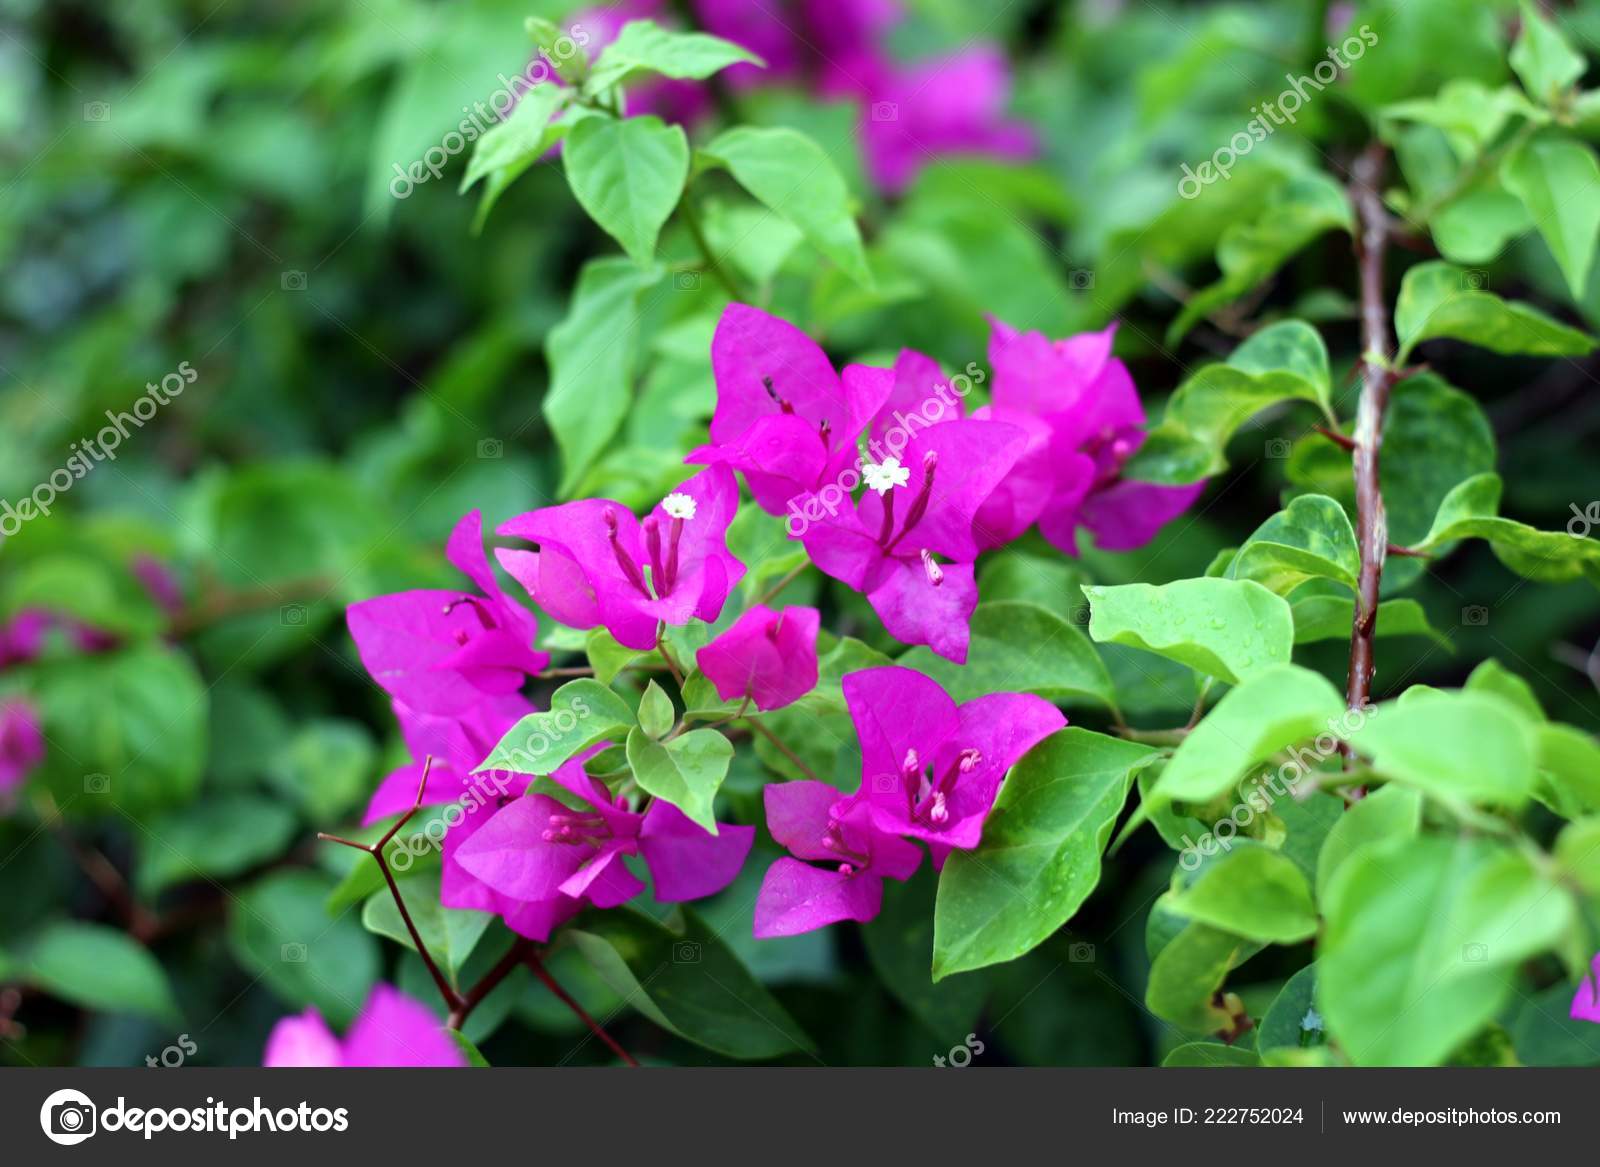 Bougainvillea Tree Flowers Green Leaves Background Selective